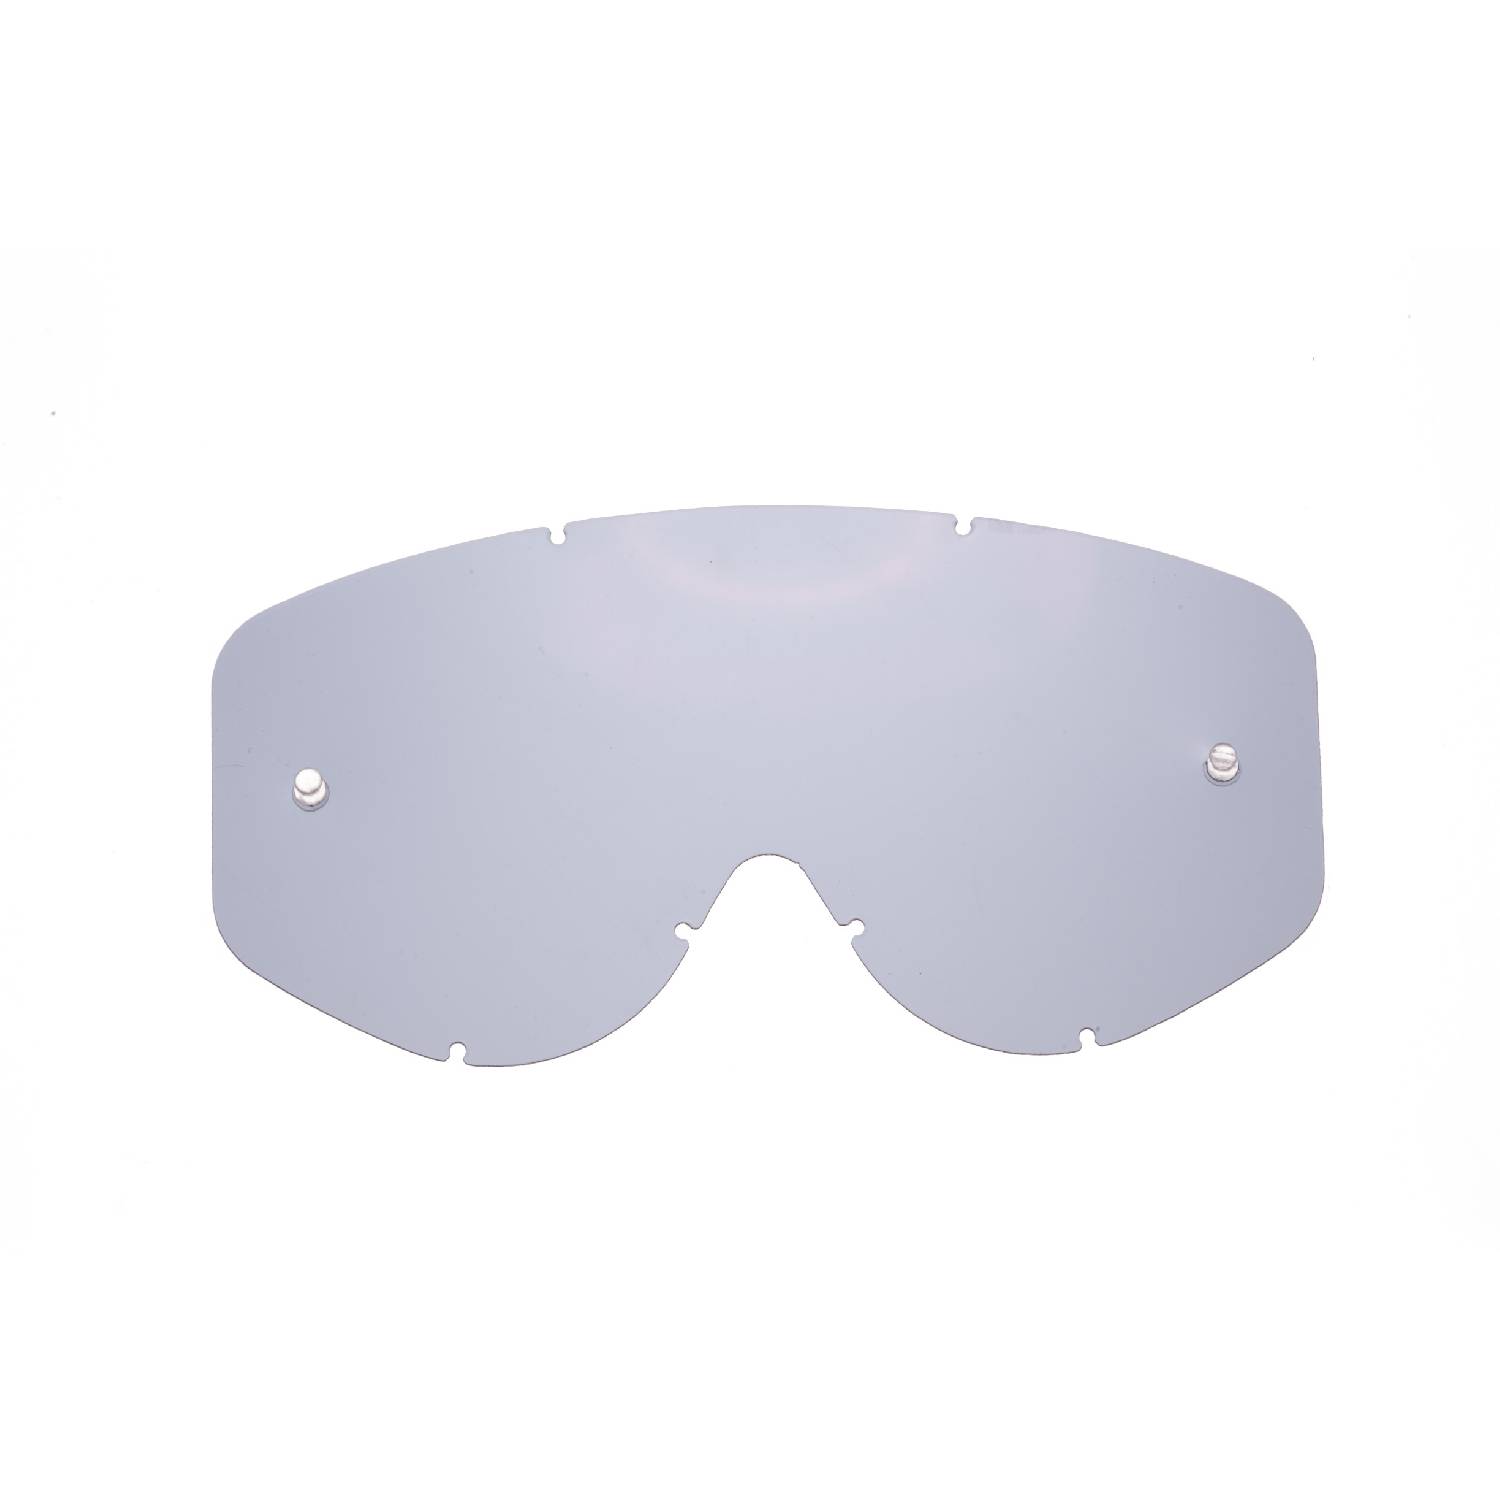 HZ Youth SE-411125-HZ smokey replacement lenses for goggles